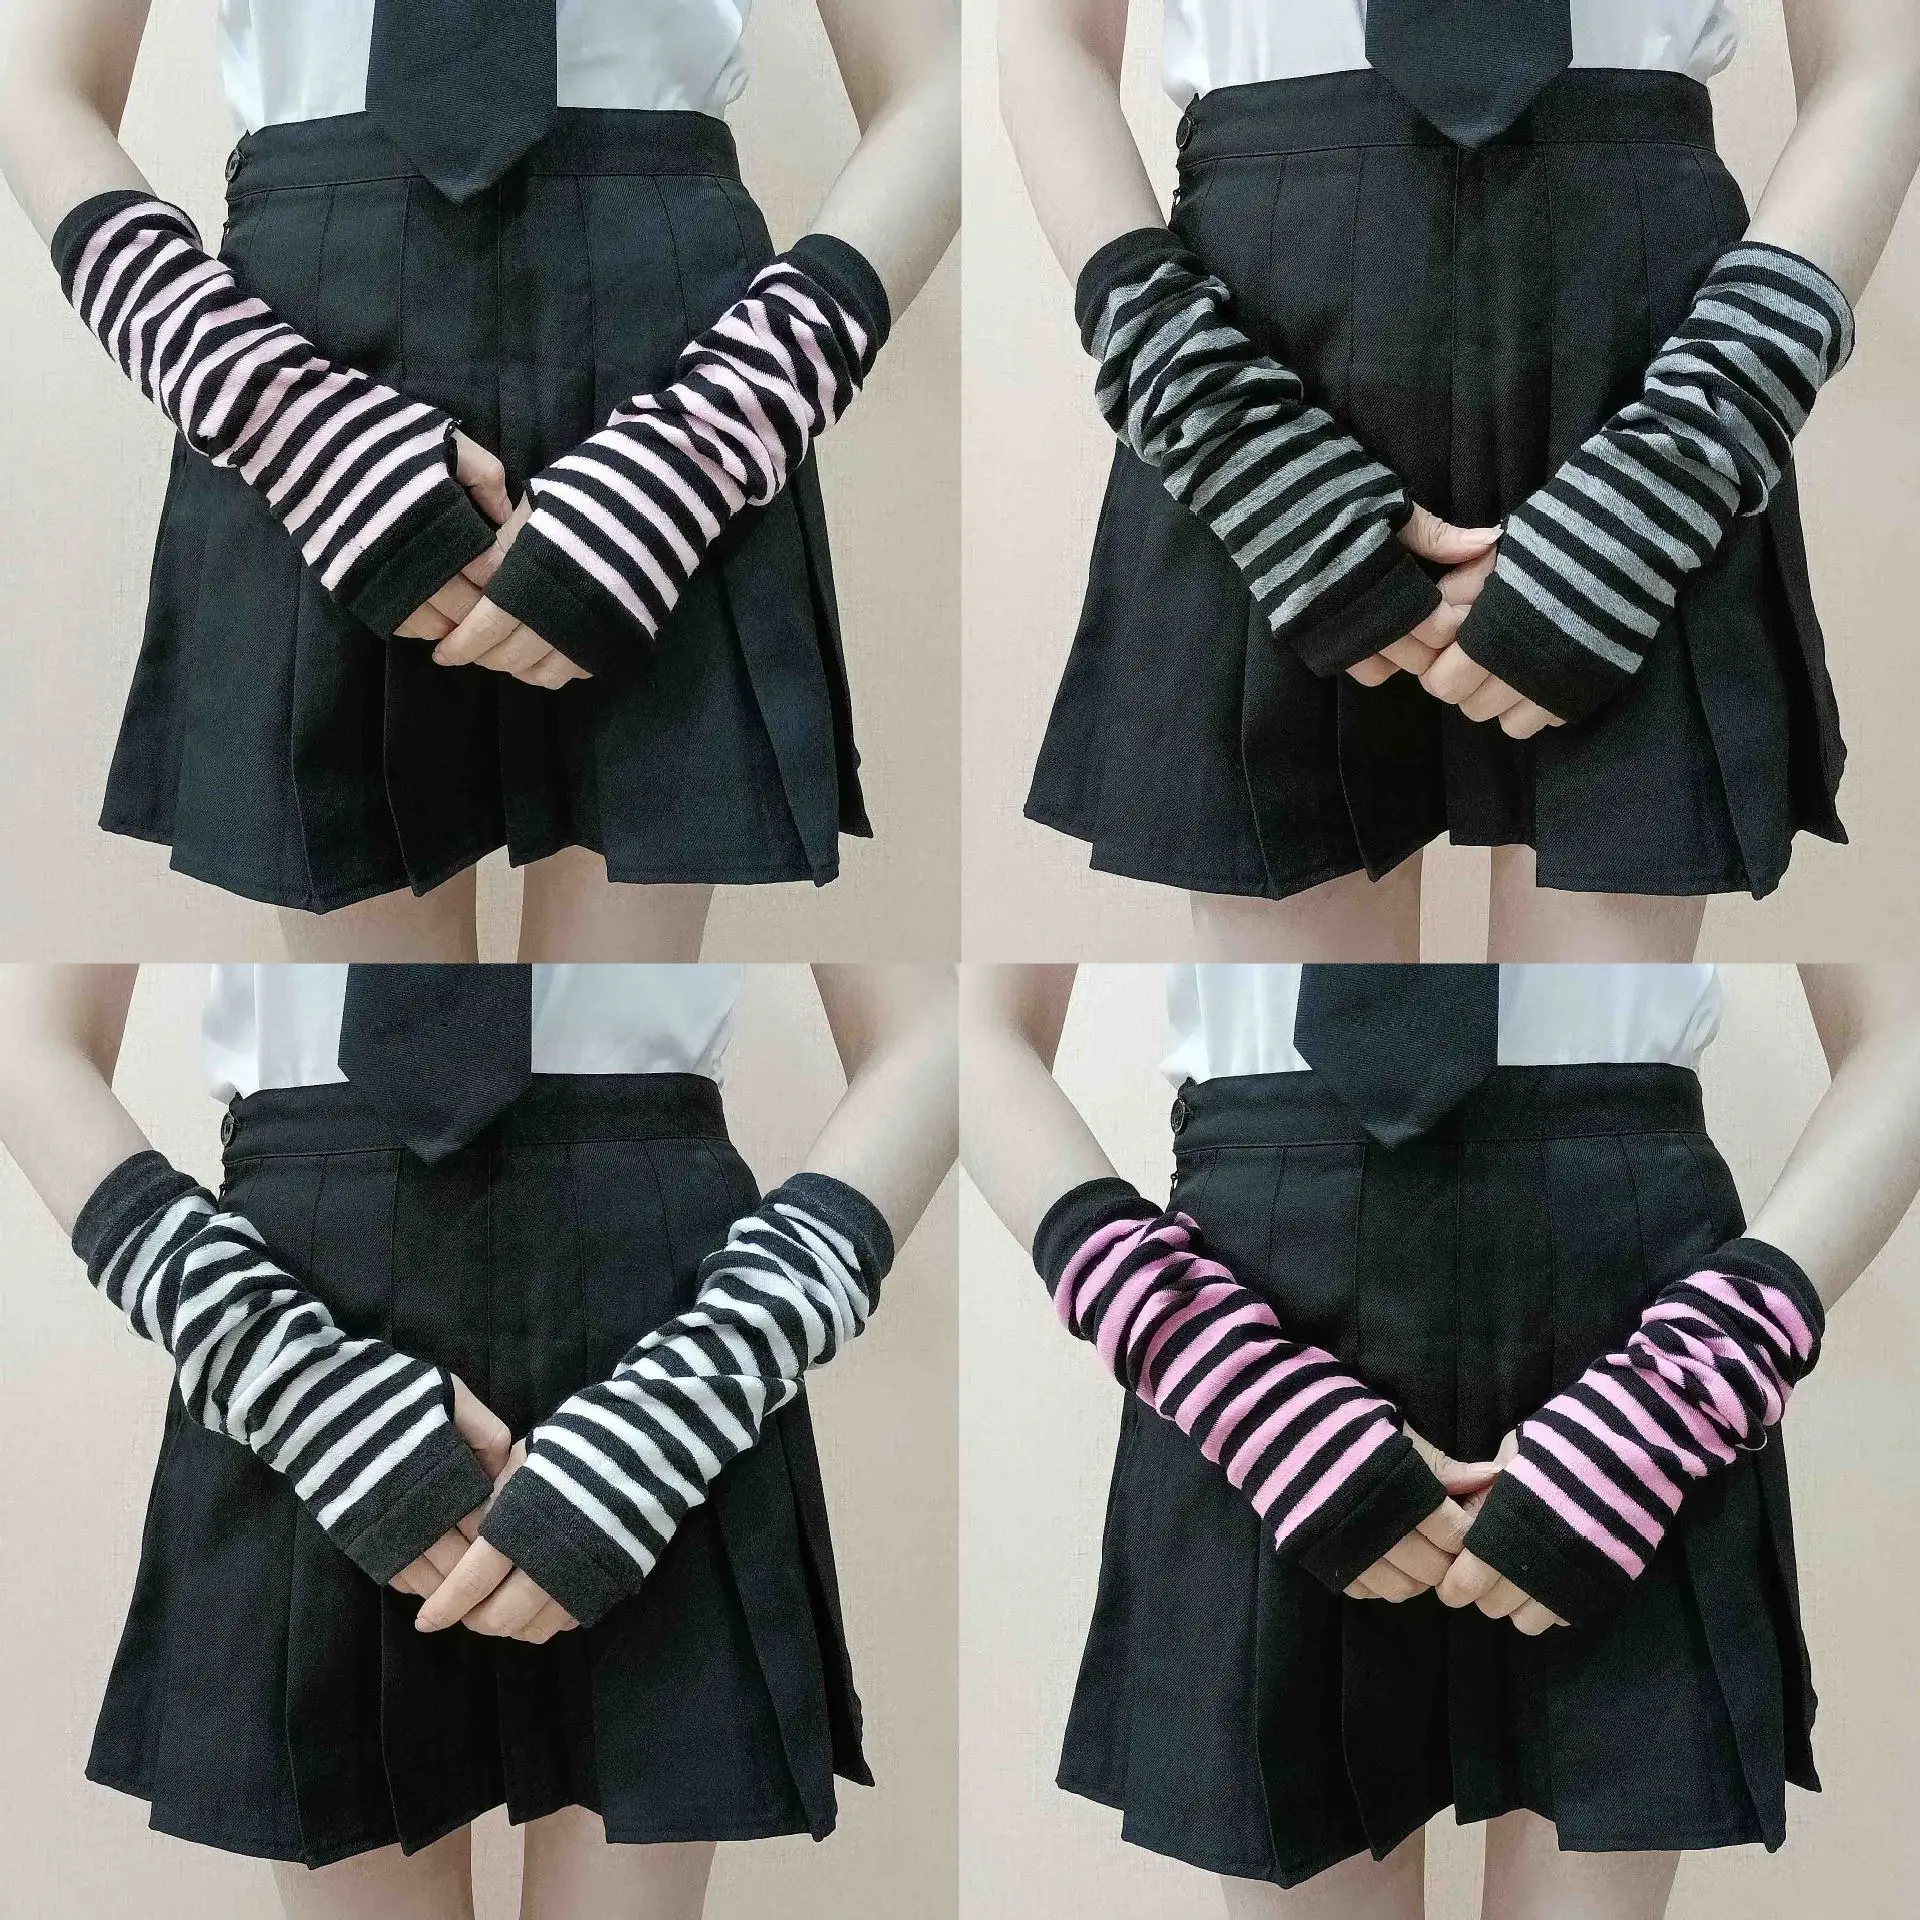 

Knitted Sleeves Harajuku Style Striped Arm Guards Warm Sun Protection Gloves Long Elbow Guard Men and Women Sheath To Cover Scar